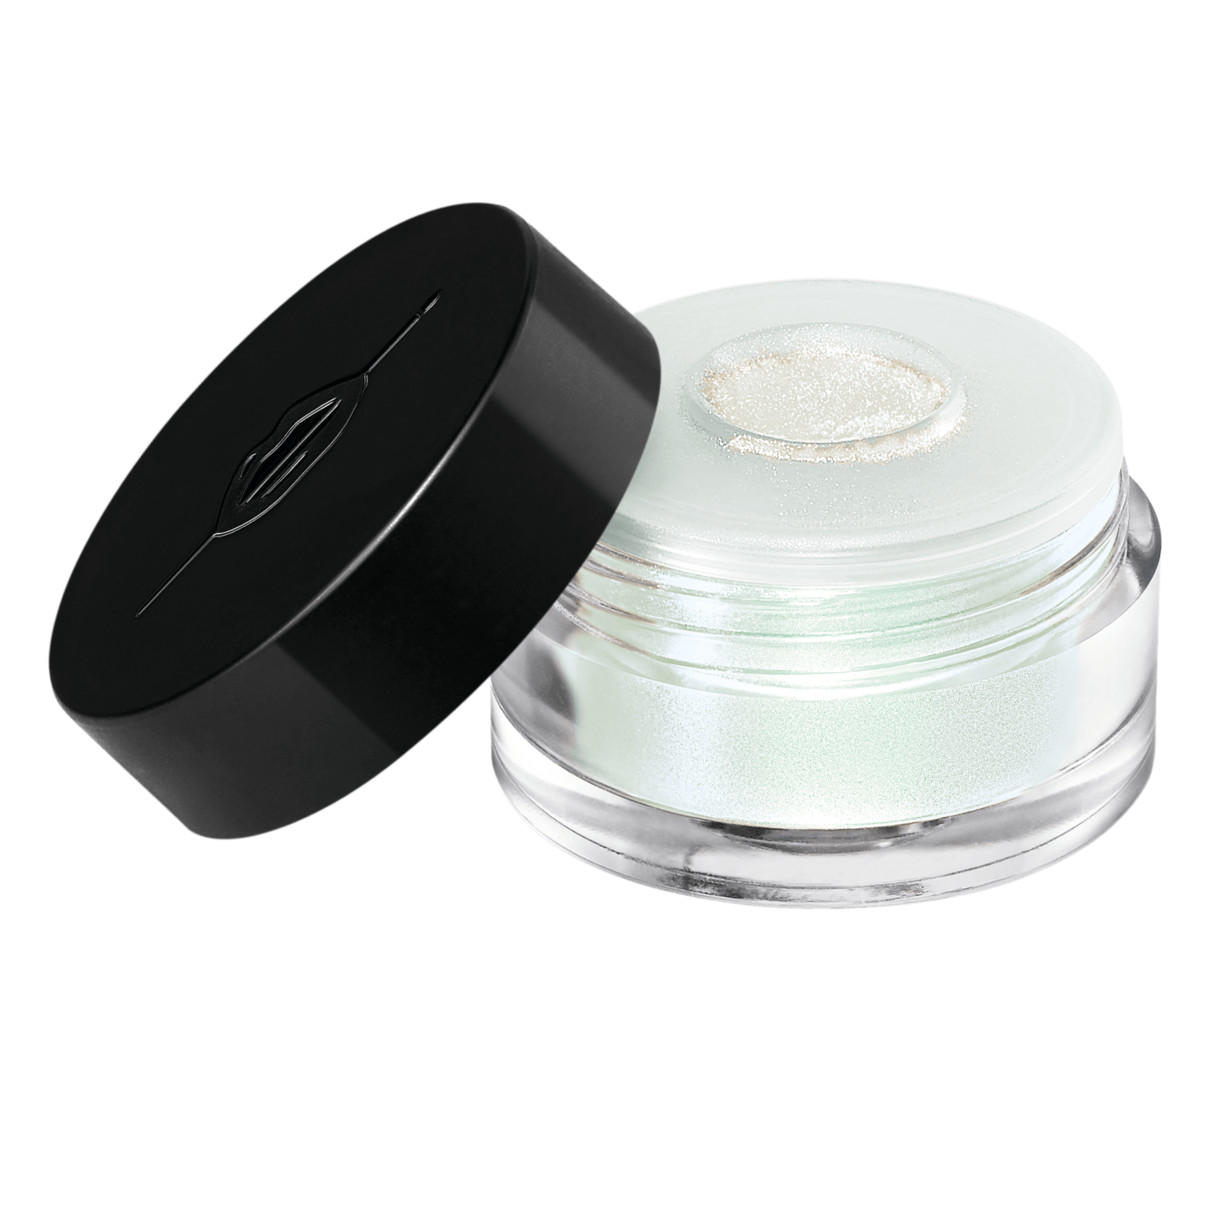 Makeup Forever Star Lit Powder Frozen Turquoise 06